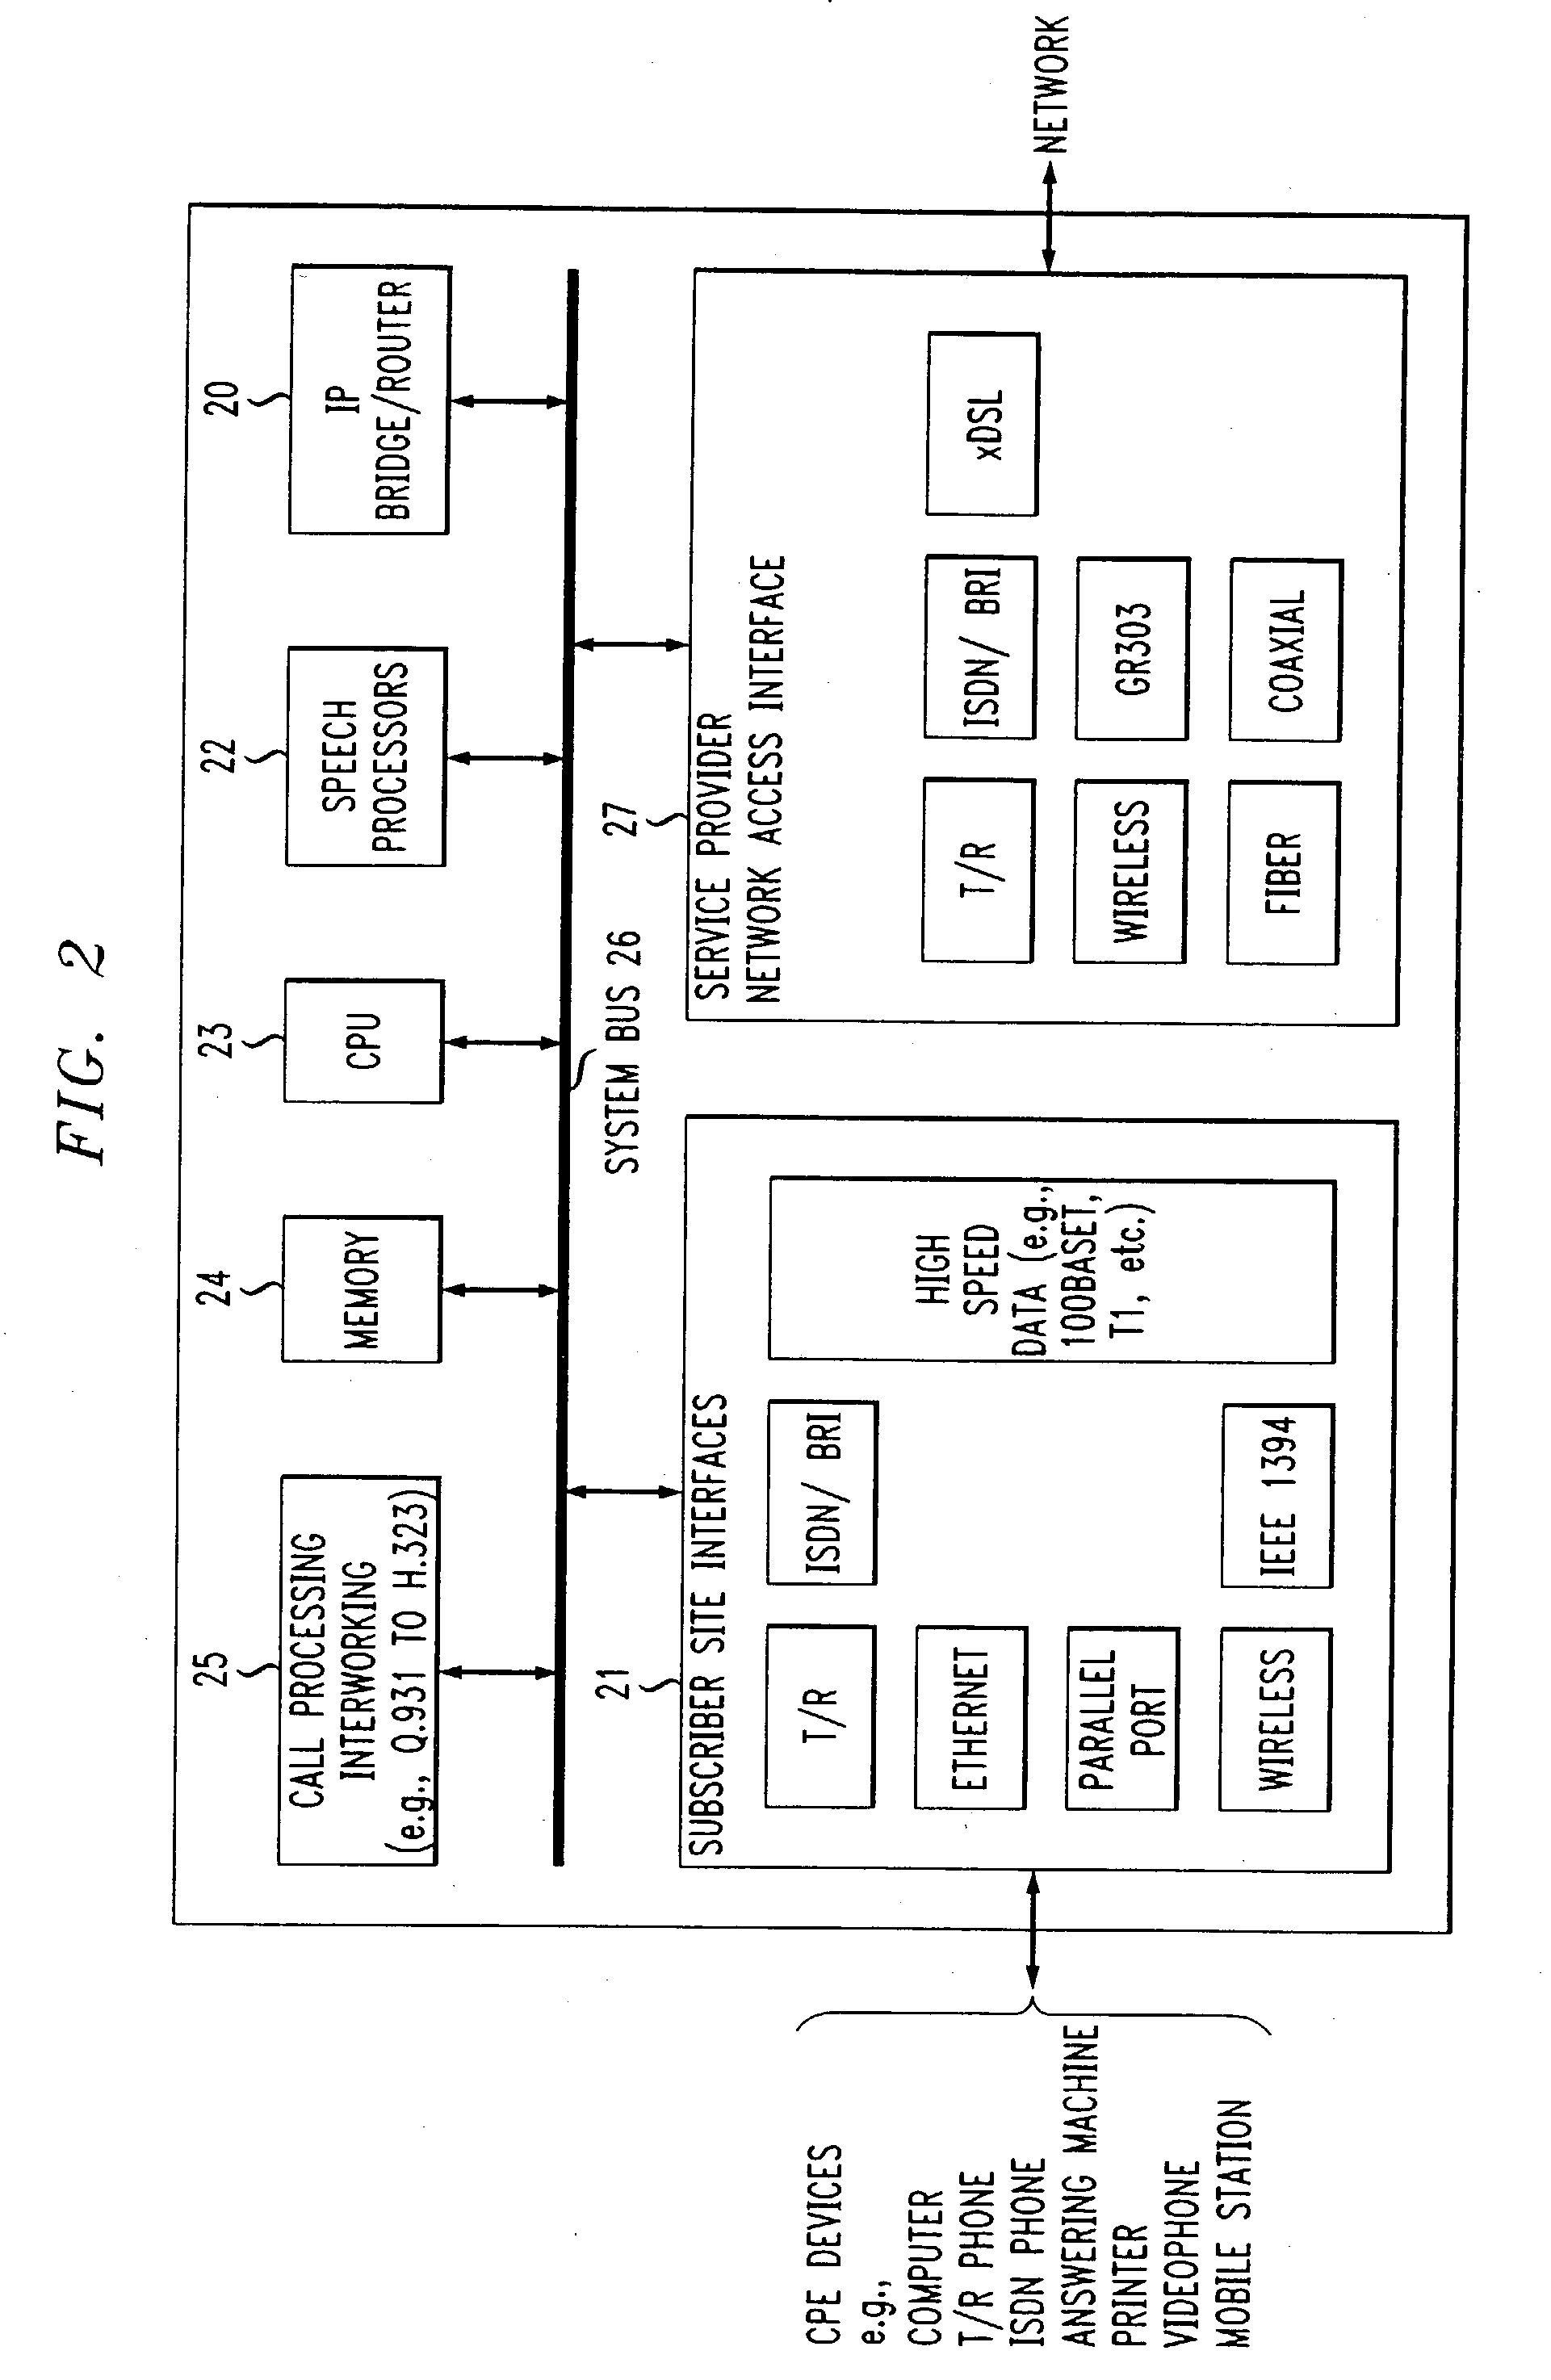 Integrated high bandwidth communications system